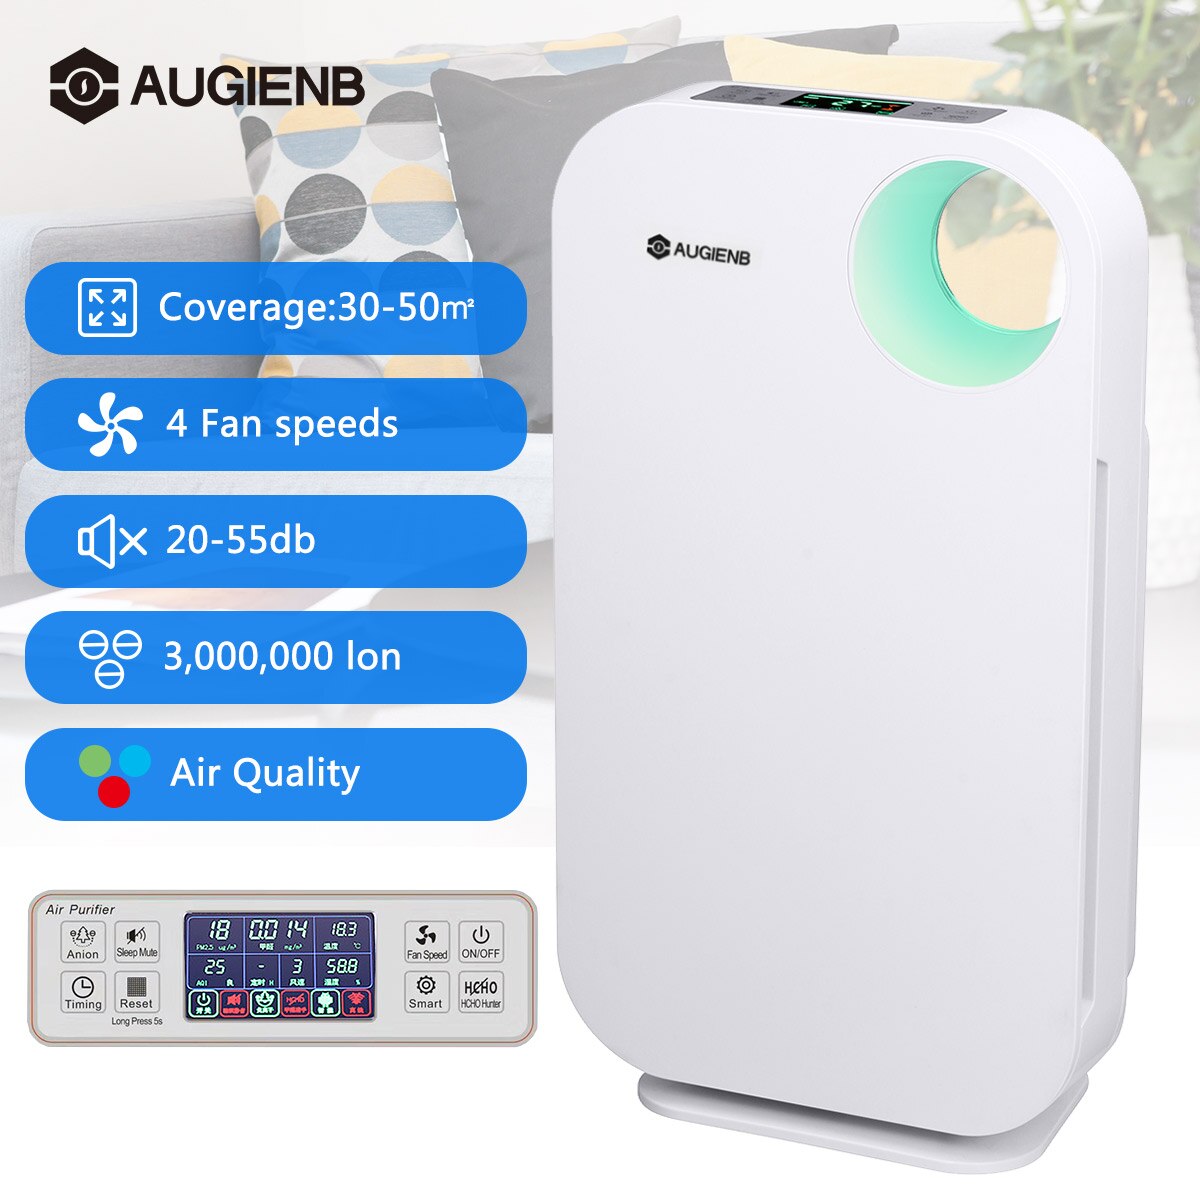 AUGIENB Air Purifier with HEPA Filter Allergies Eliminator Negative ion Air Cleaner For PM2.5 Dust Pollen Smoke Pet Dander